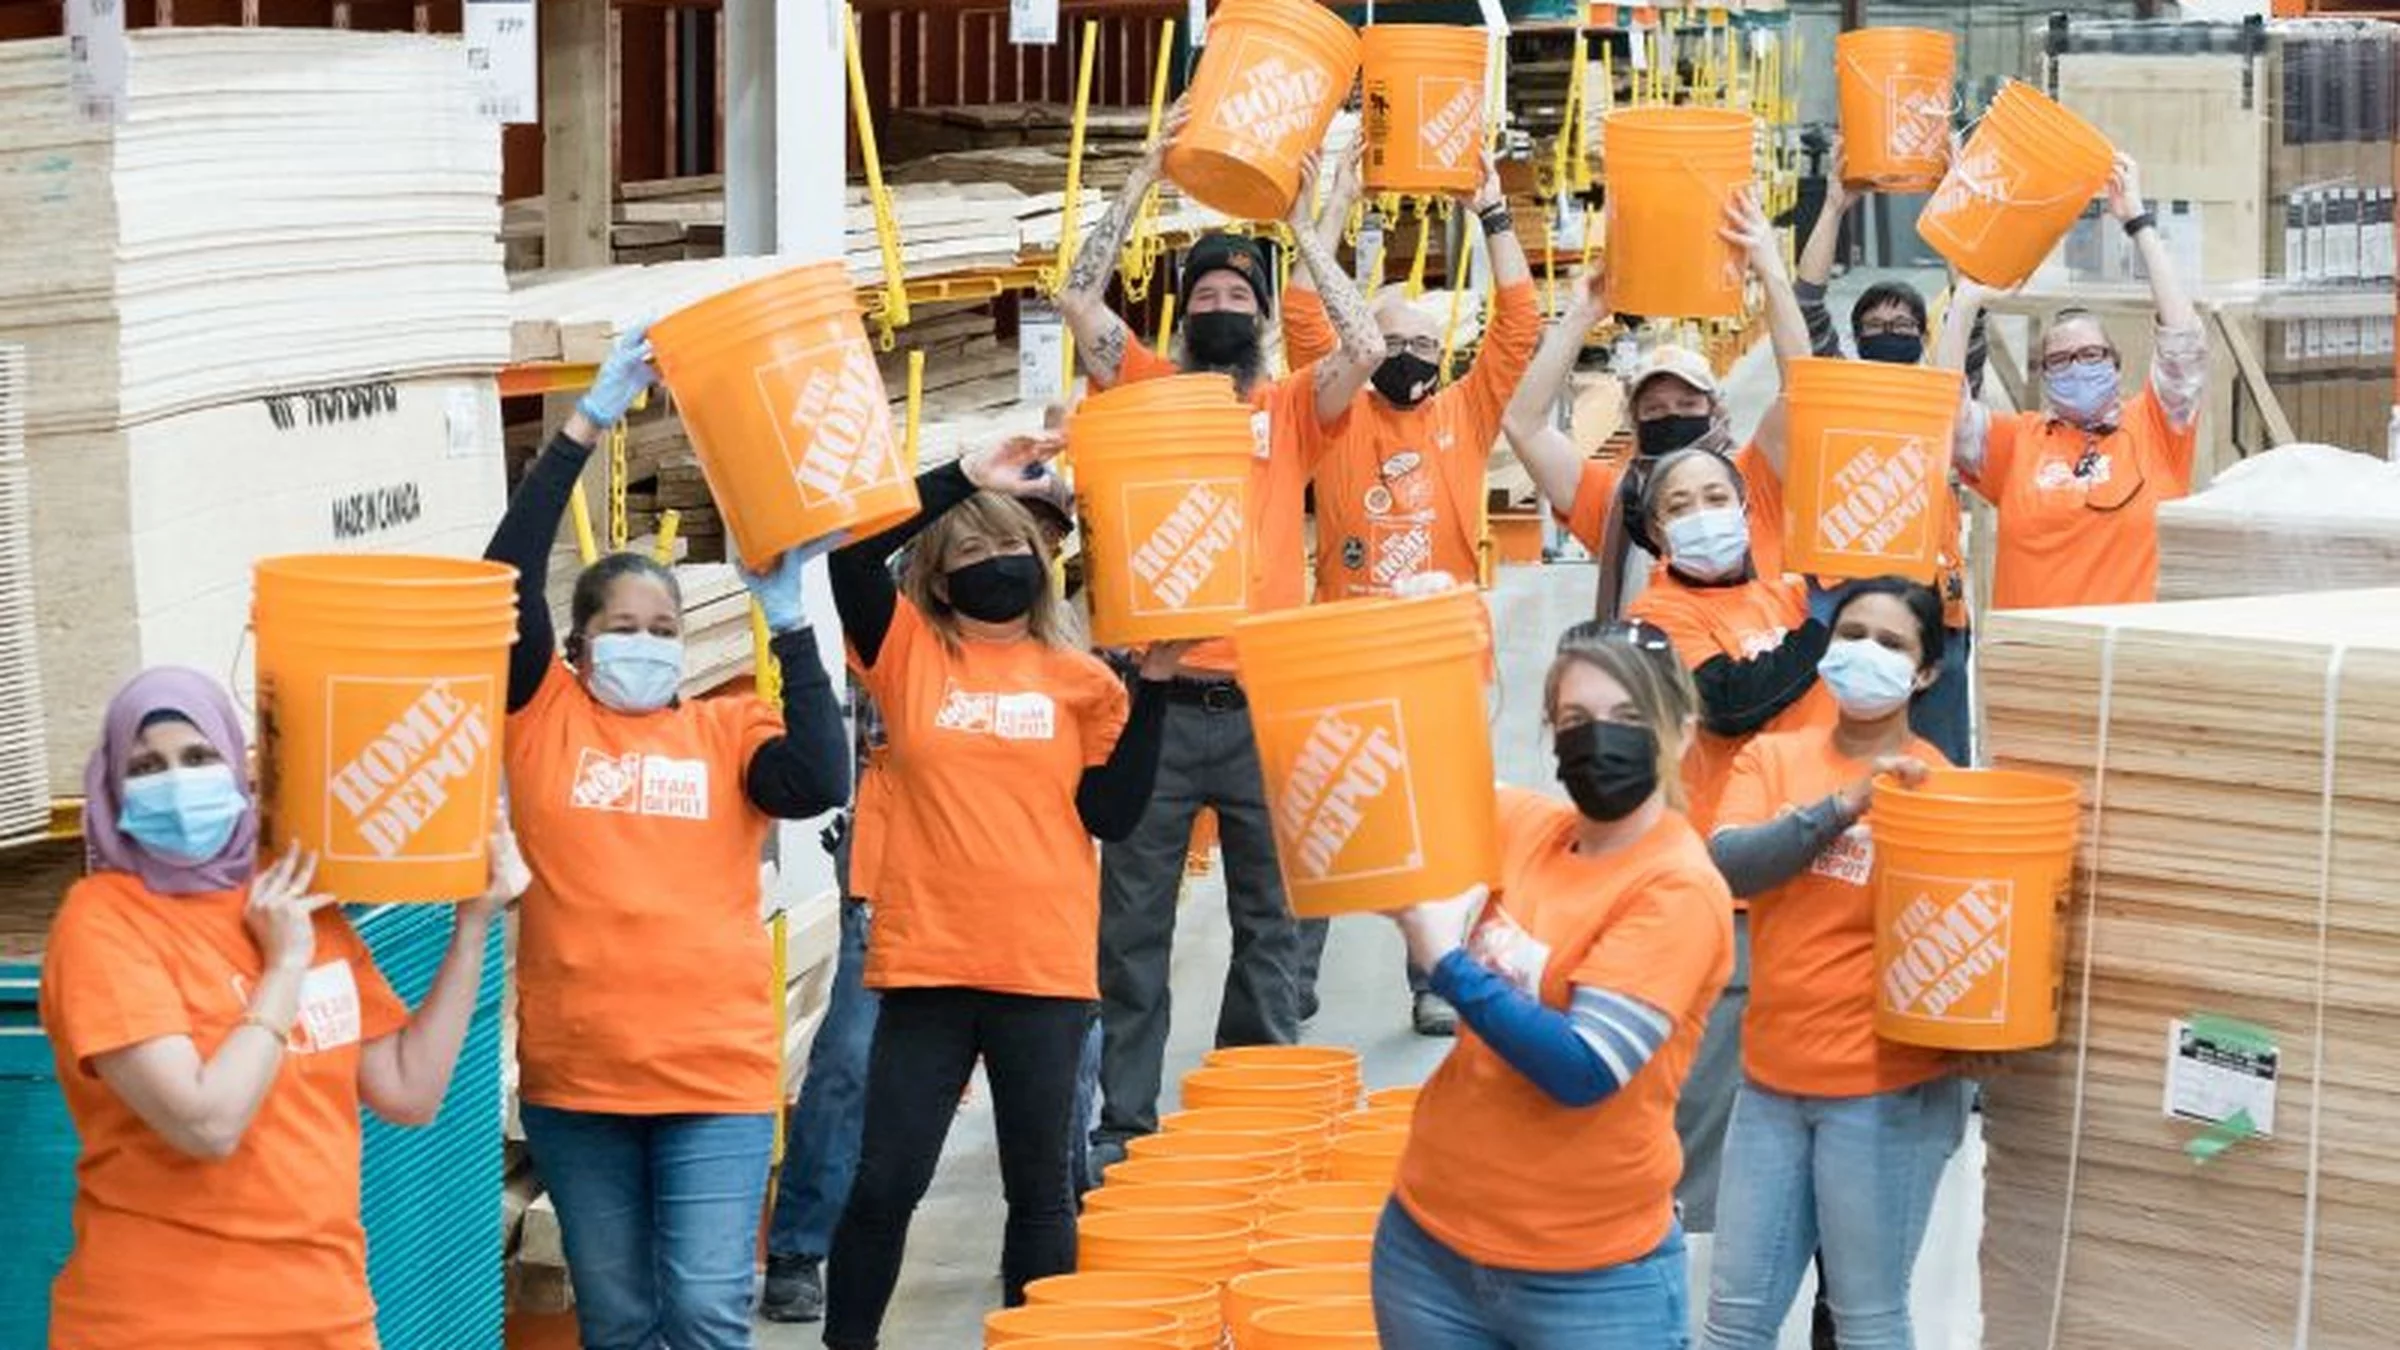 How much is employee discount at Home Depot?